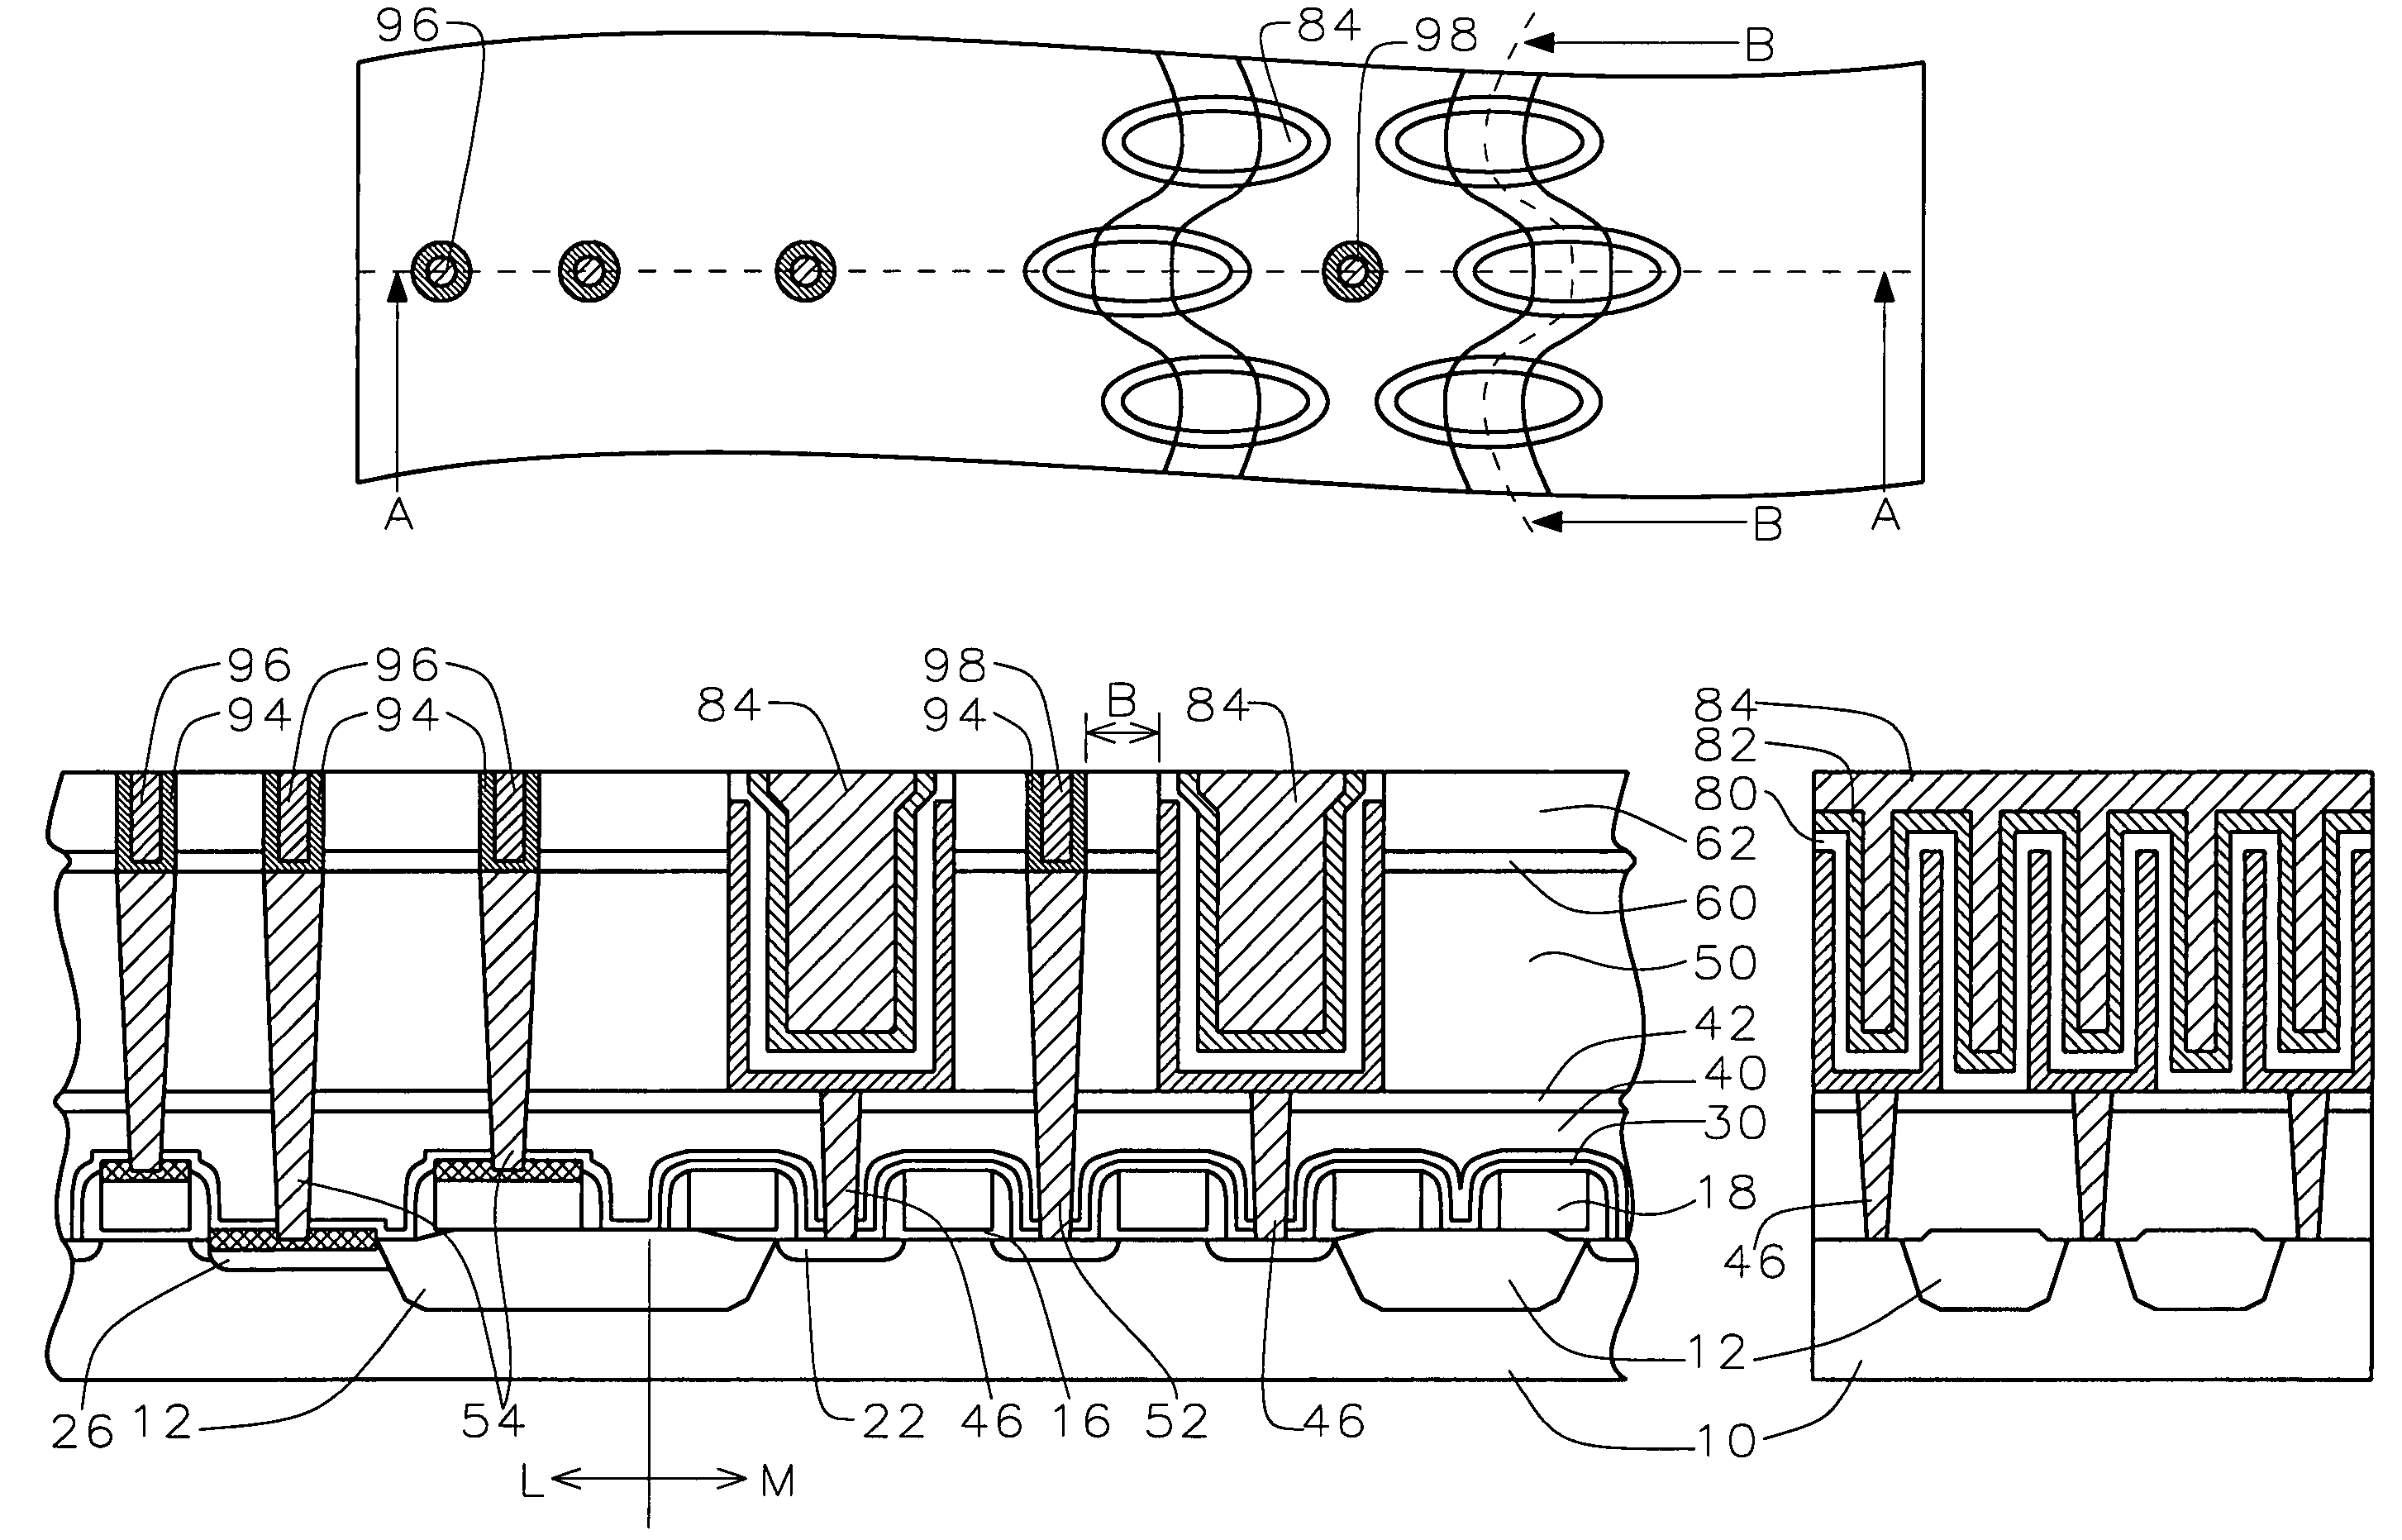 Embedded DRAM for metal-insulator-metal (MIM) capacitor structure